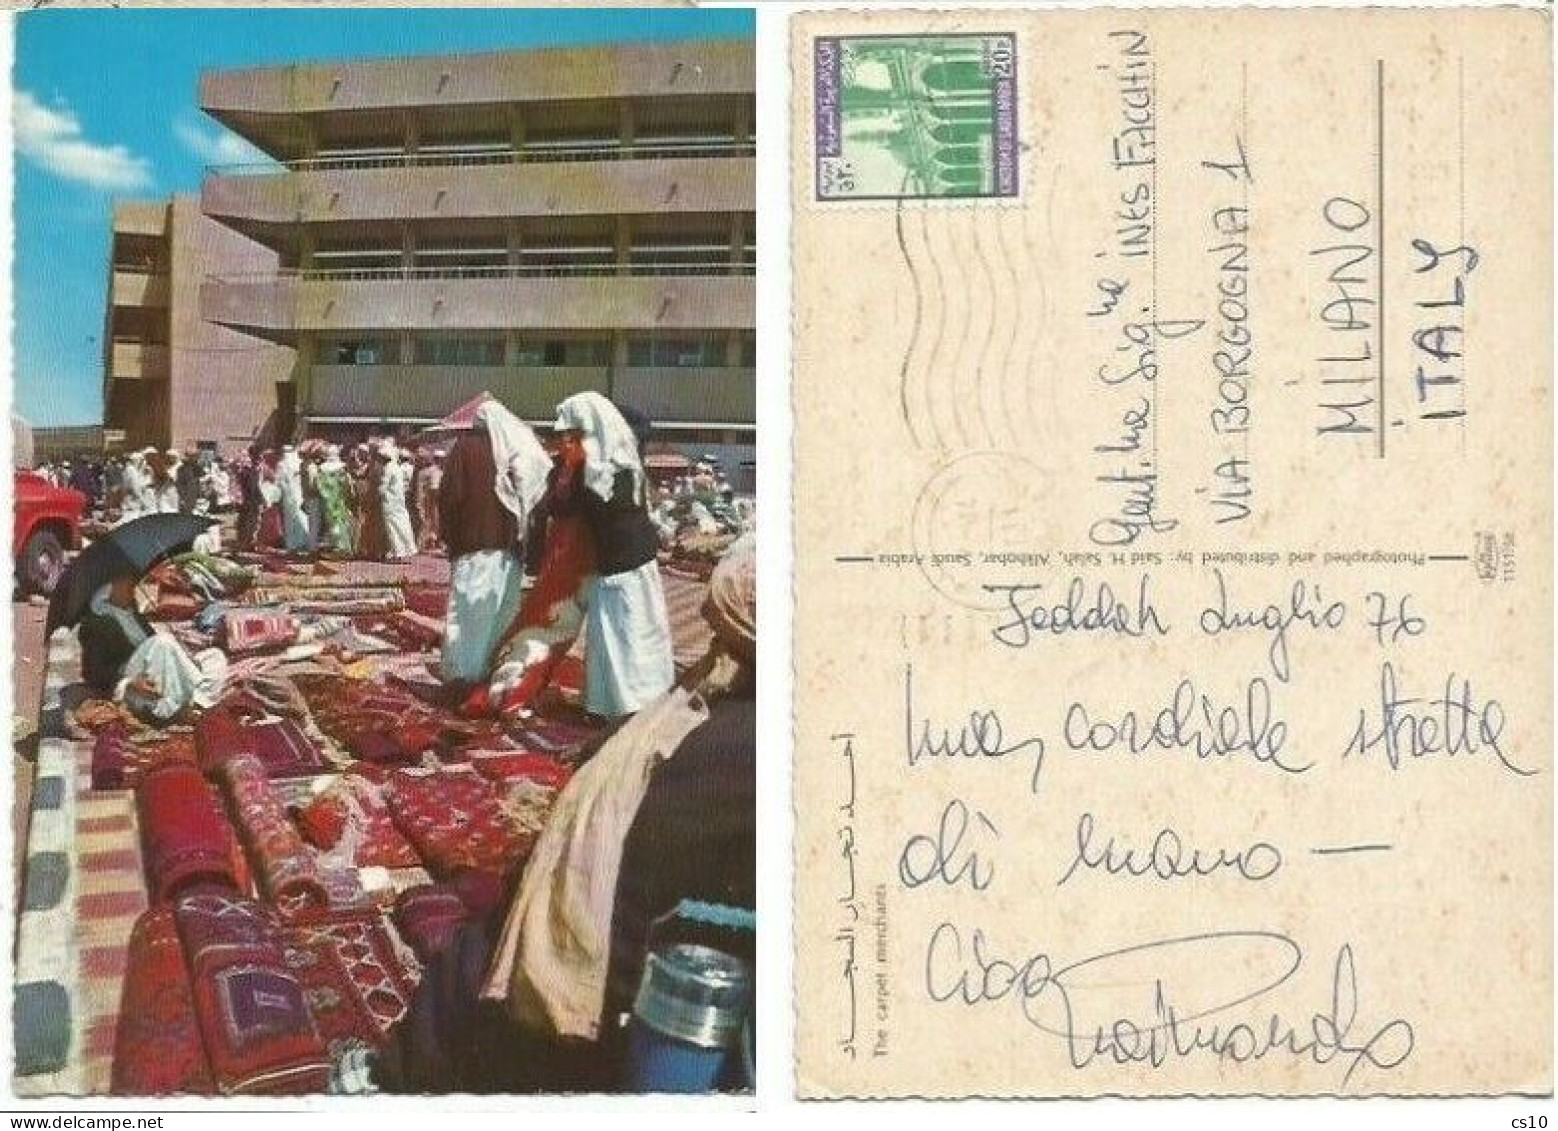 Saudi Arabia The Carpet Merchants - Pcard Jeddah July1976 X Italy With Regular Issue P.20 Solo Franking - Mercaderes